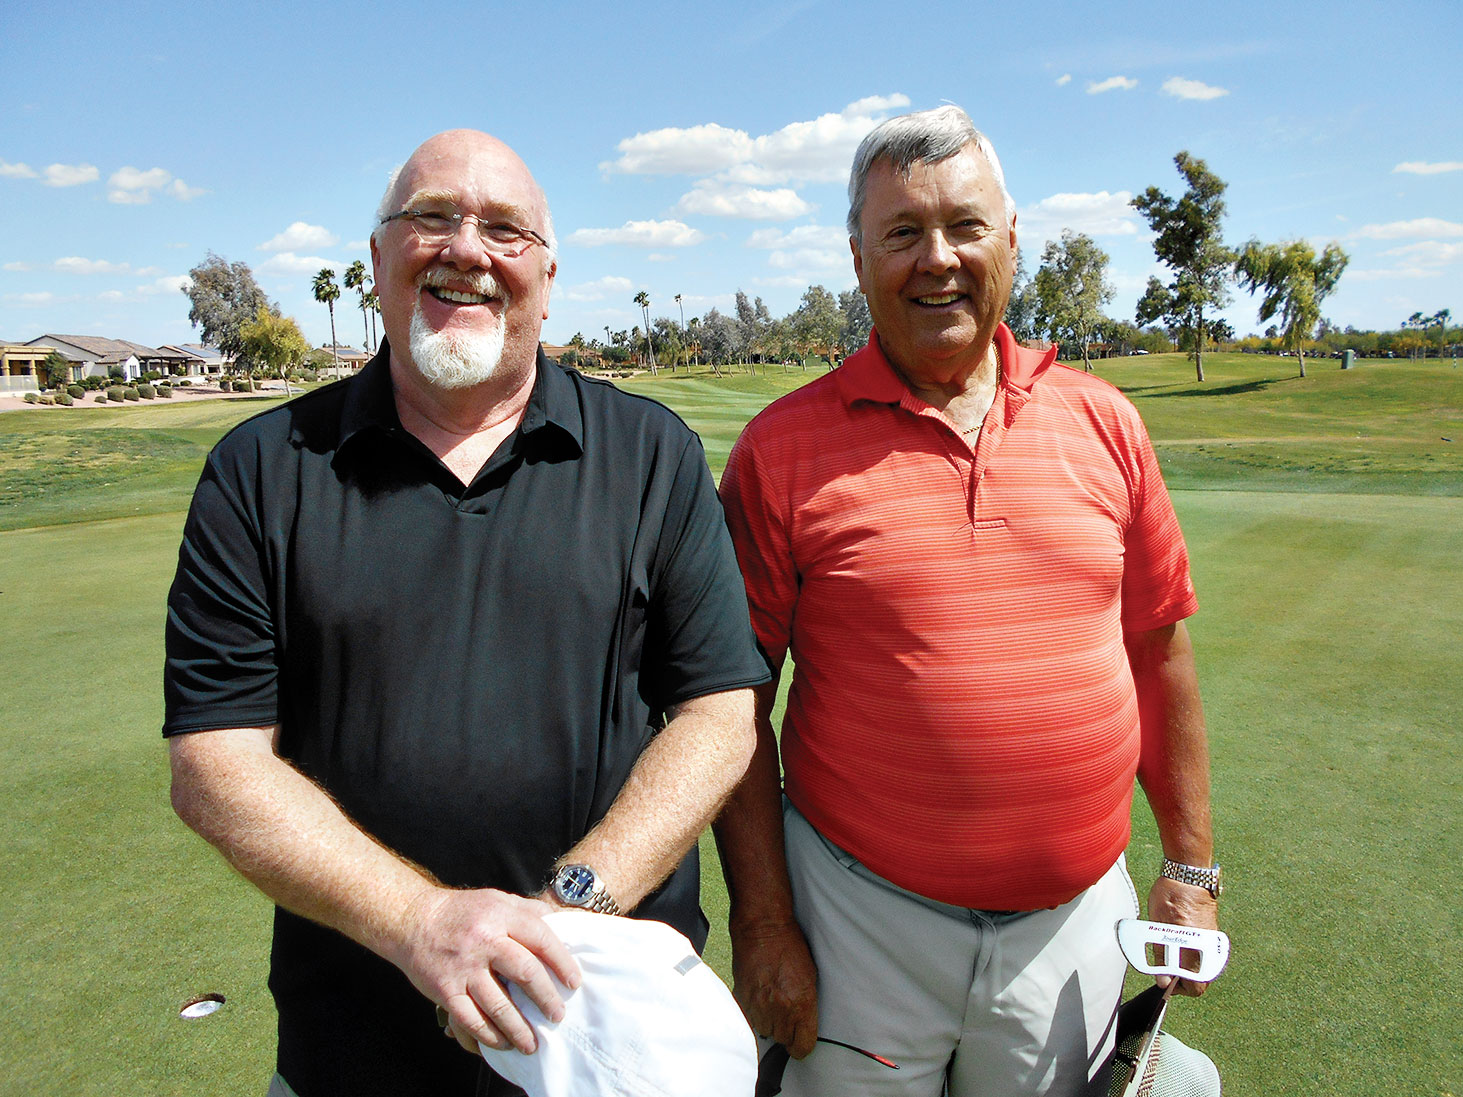 Member-Guest Traditional Format Overall Winners, left to right: Andy Ogens and Jerry White